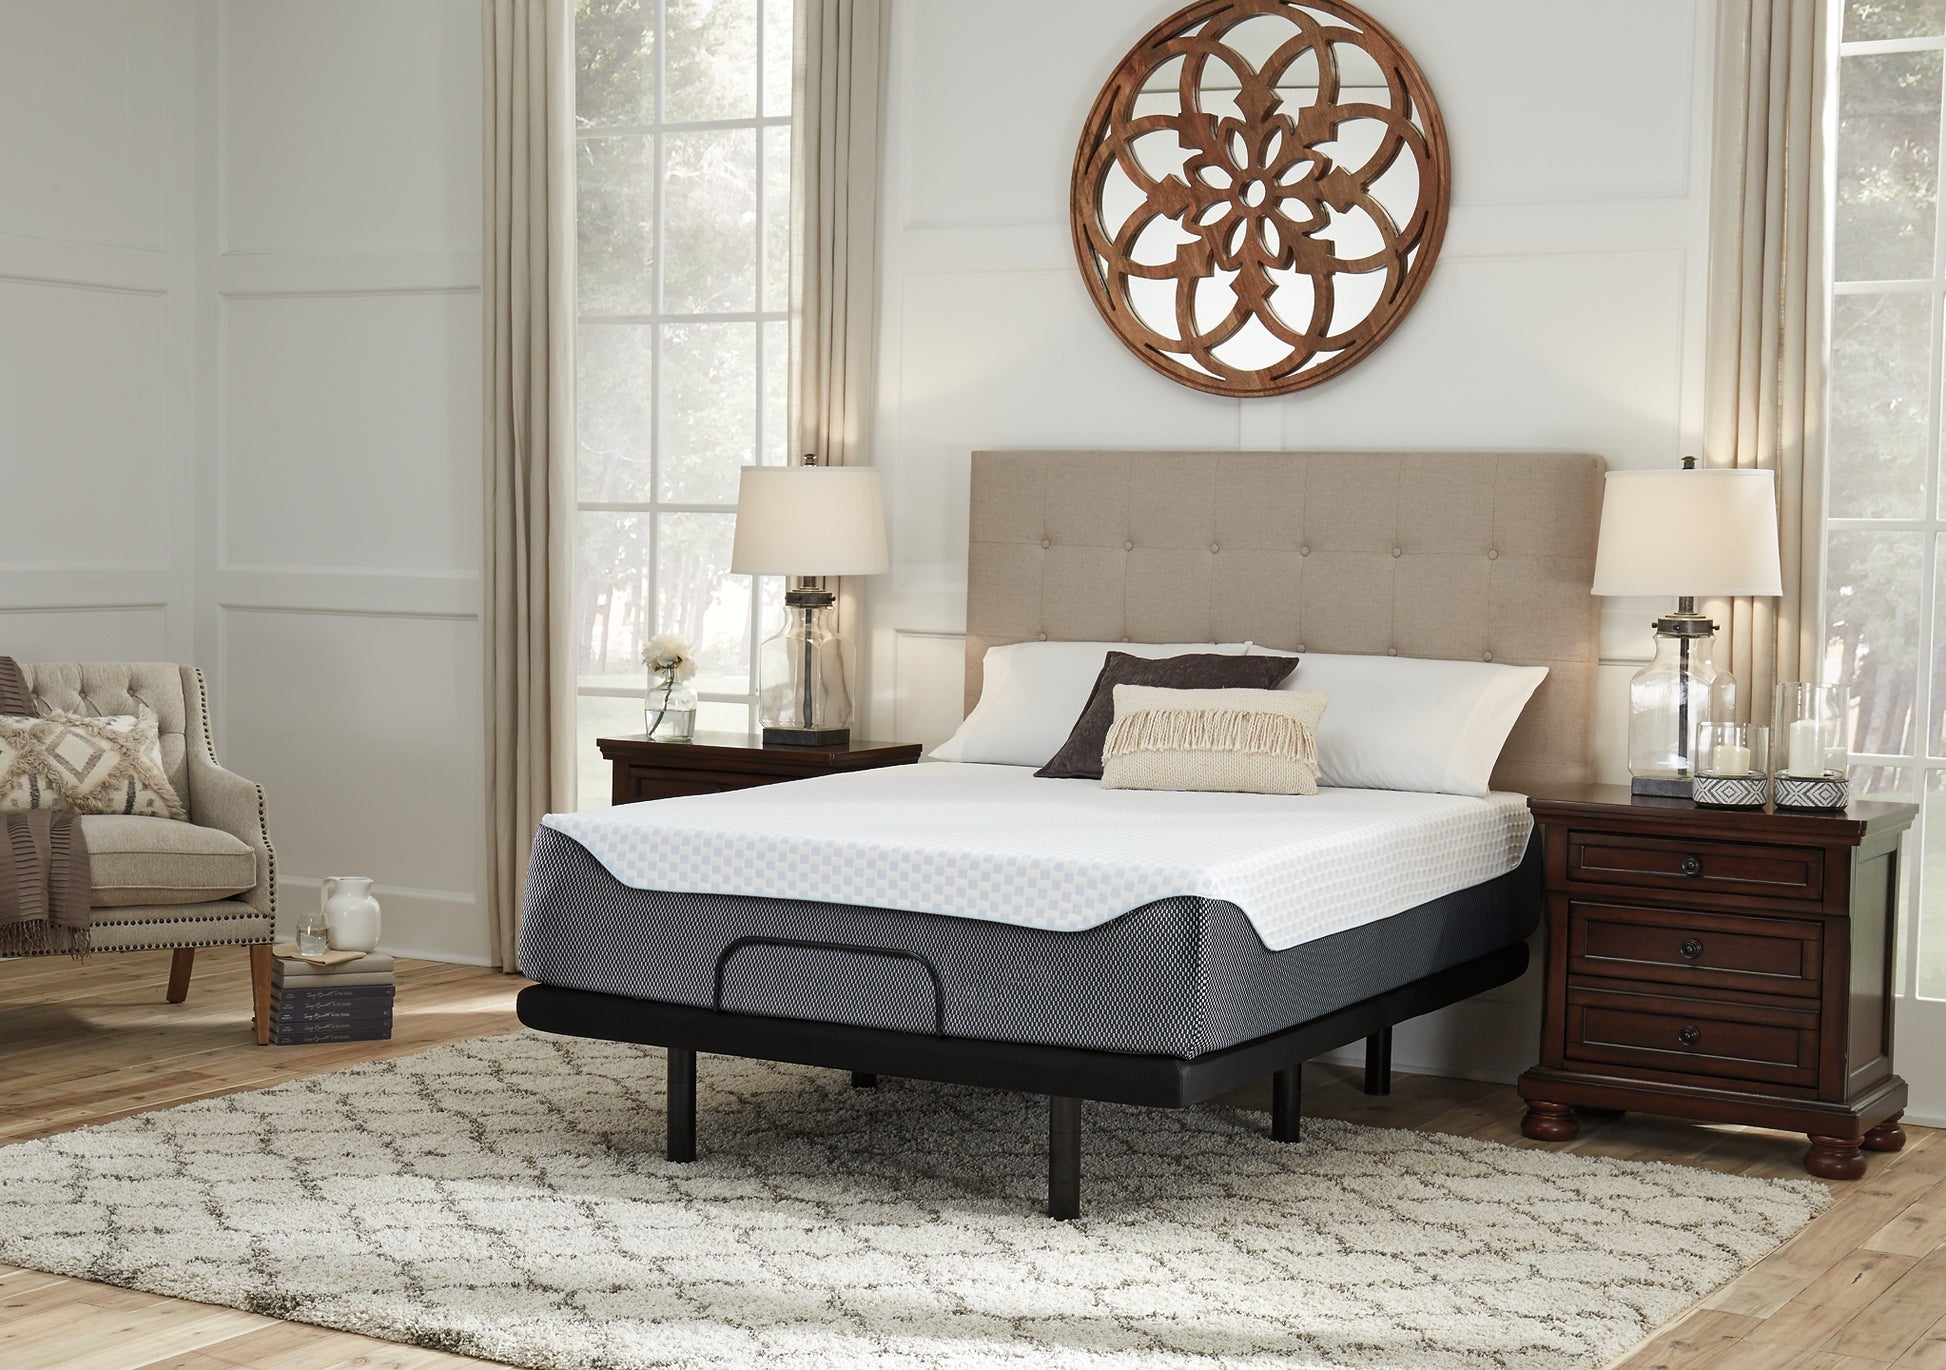 14 Inch Chime Elite Mattress with Adjustable Base JB's Furniture Furniture, Bedroom, Accessories